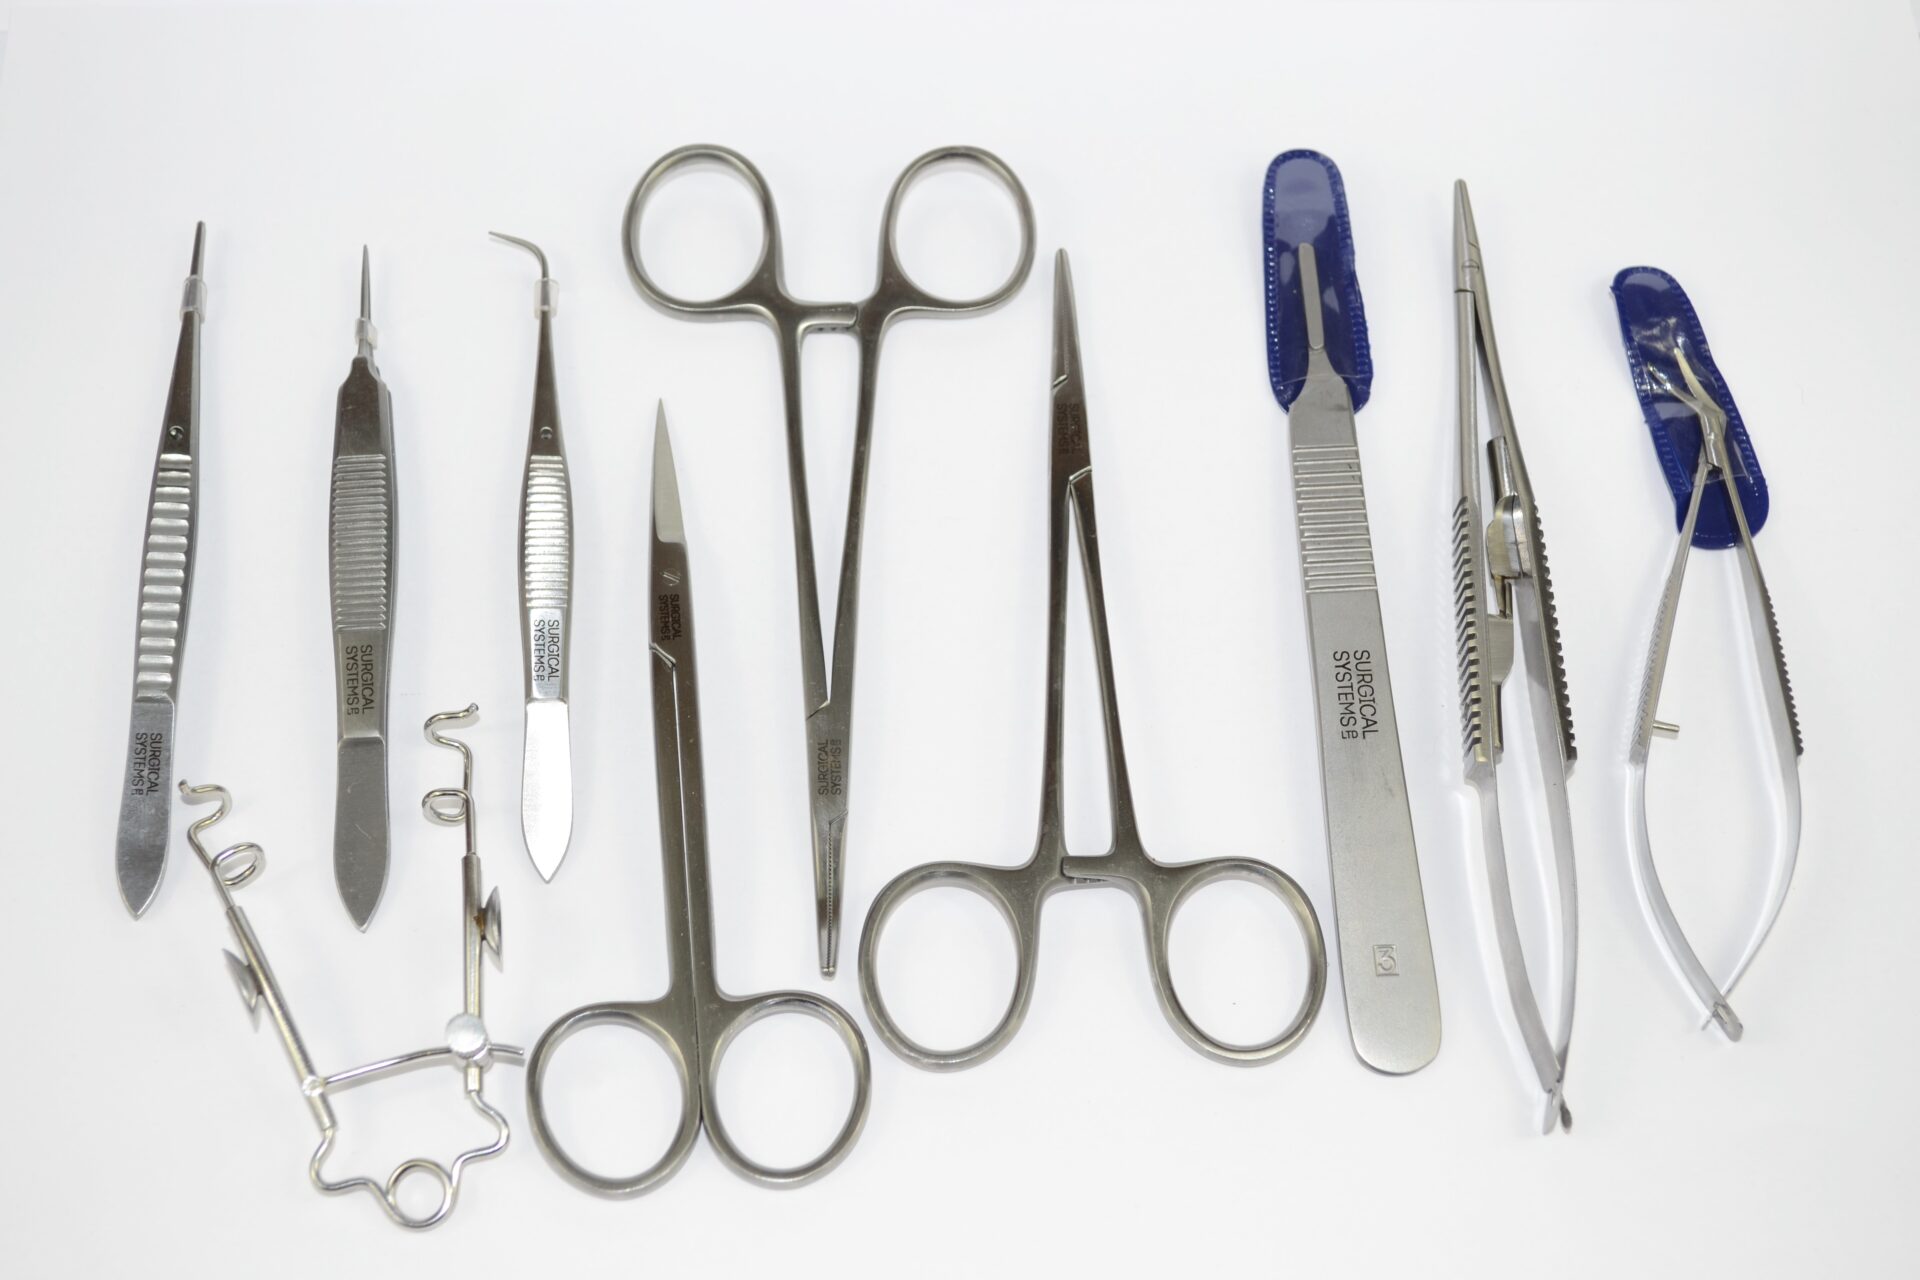 Urology Surgical Instruments Market  Overview Analysis, Trends, Share, Size, Type & Future Forecast to 2033